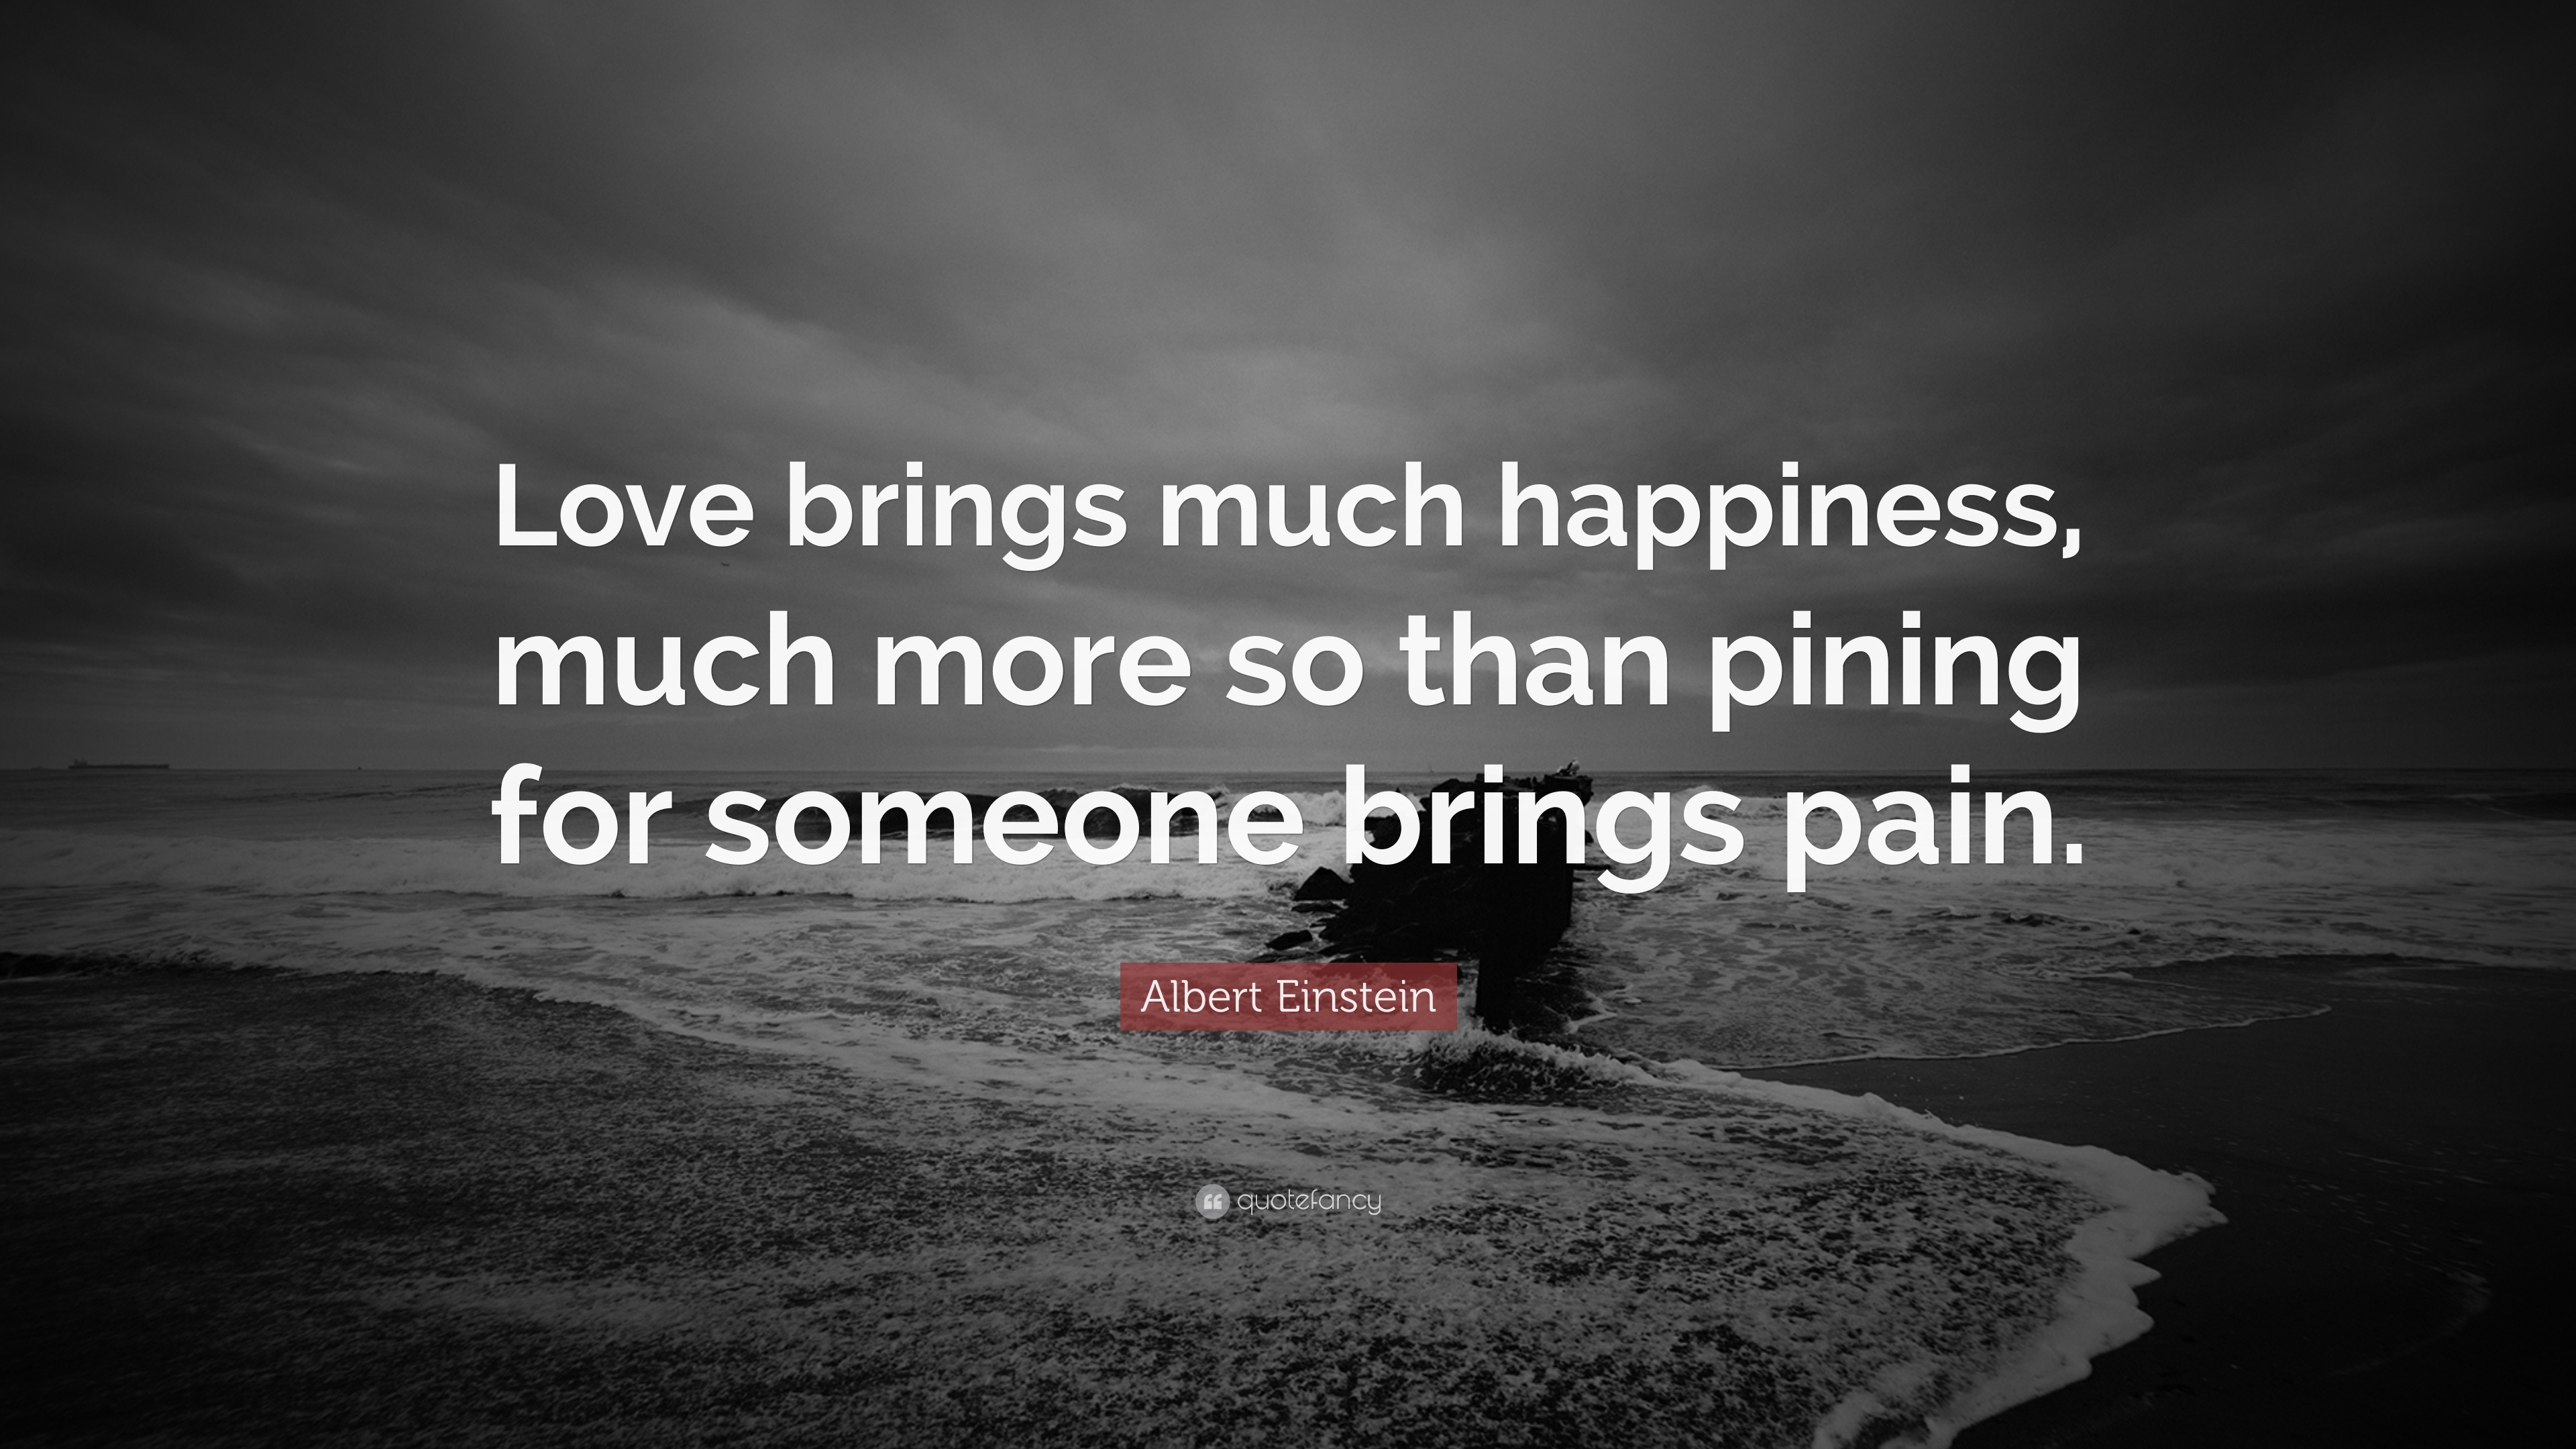 Albert Einstein Quote “Love brings much happiness much more so than pining for